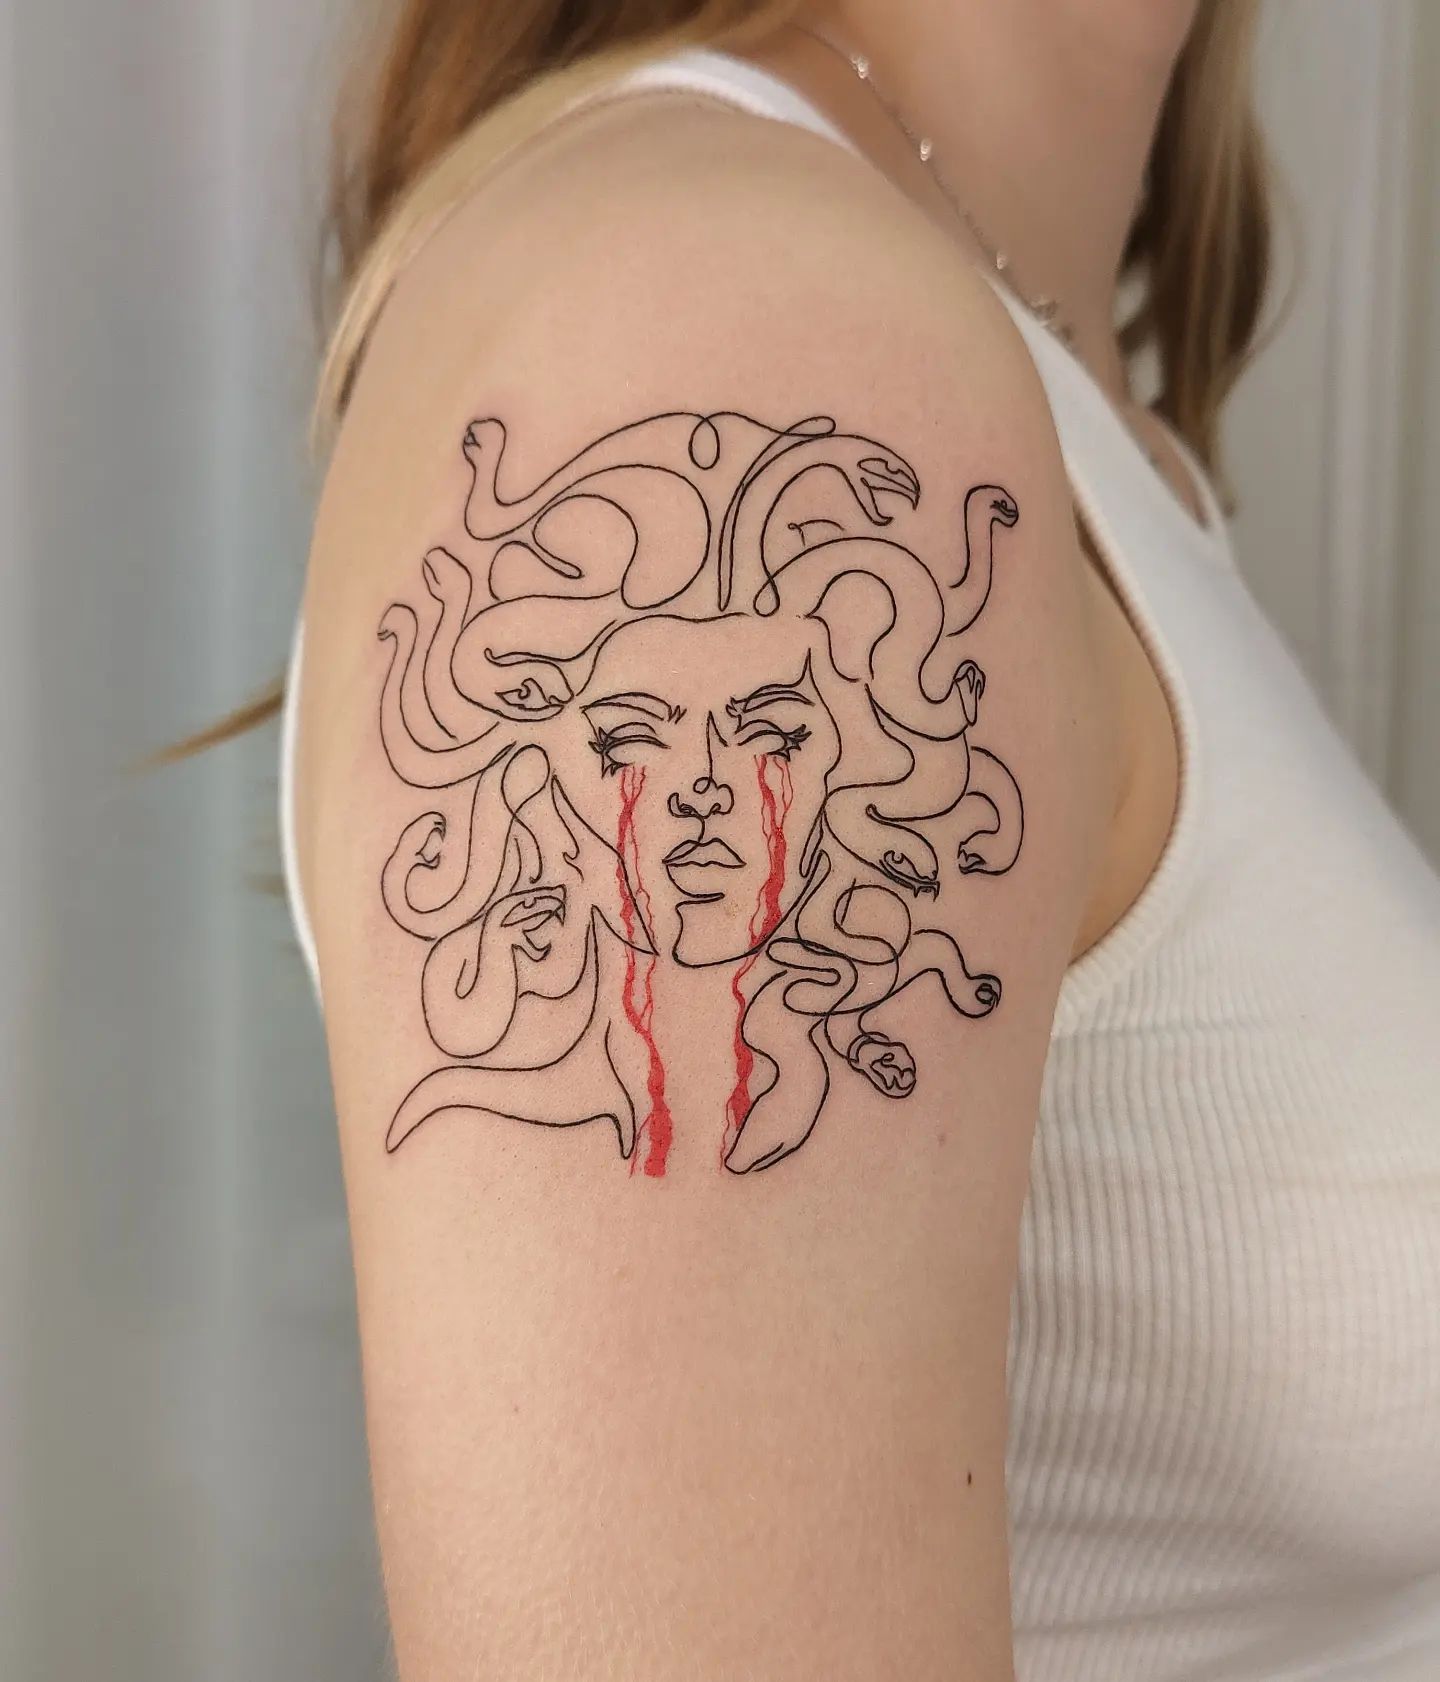 100 New Medusa Tattoos and Meaning Latest Tattoo Ideas  The Trend Scout